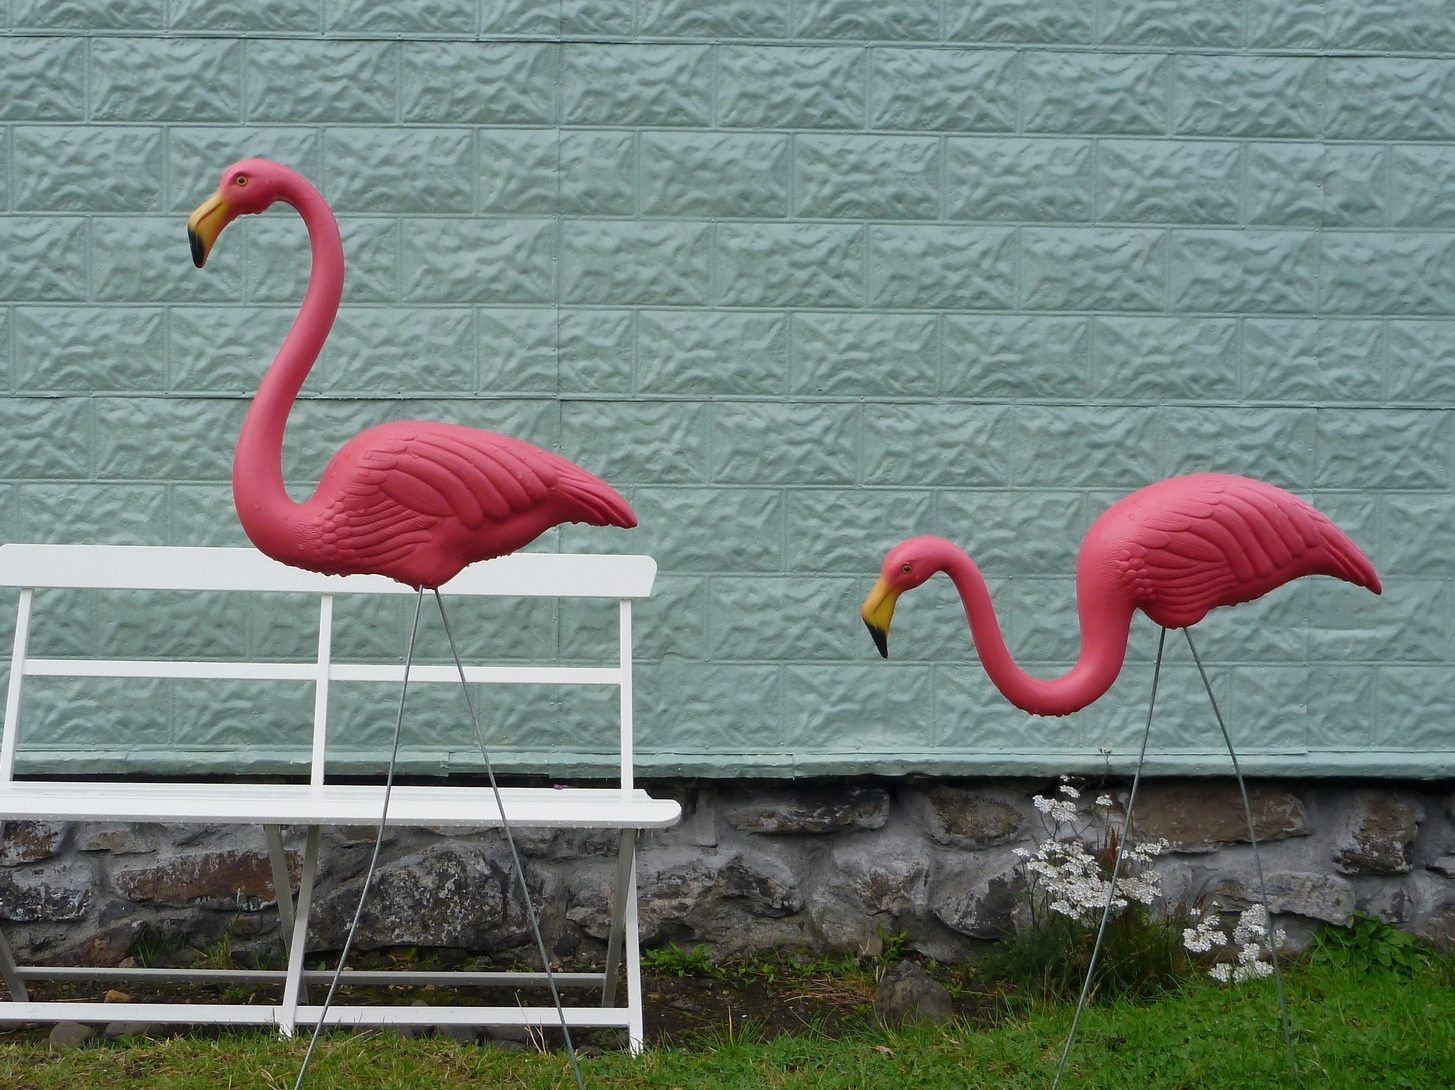 Pink lawn flamingos at RV parks means swingers live there Toronto image